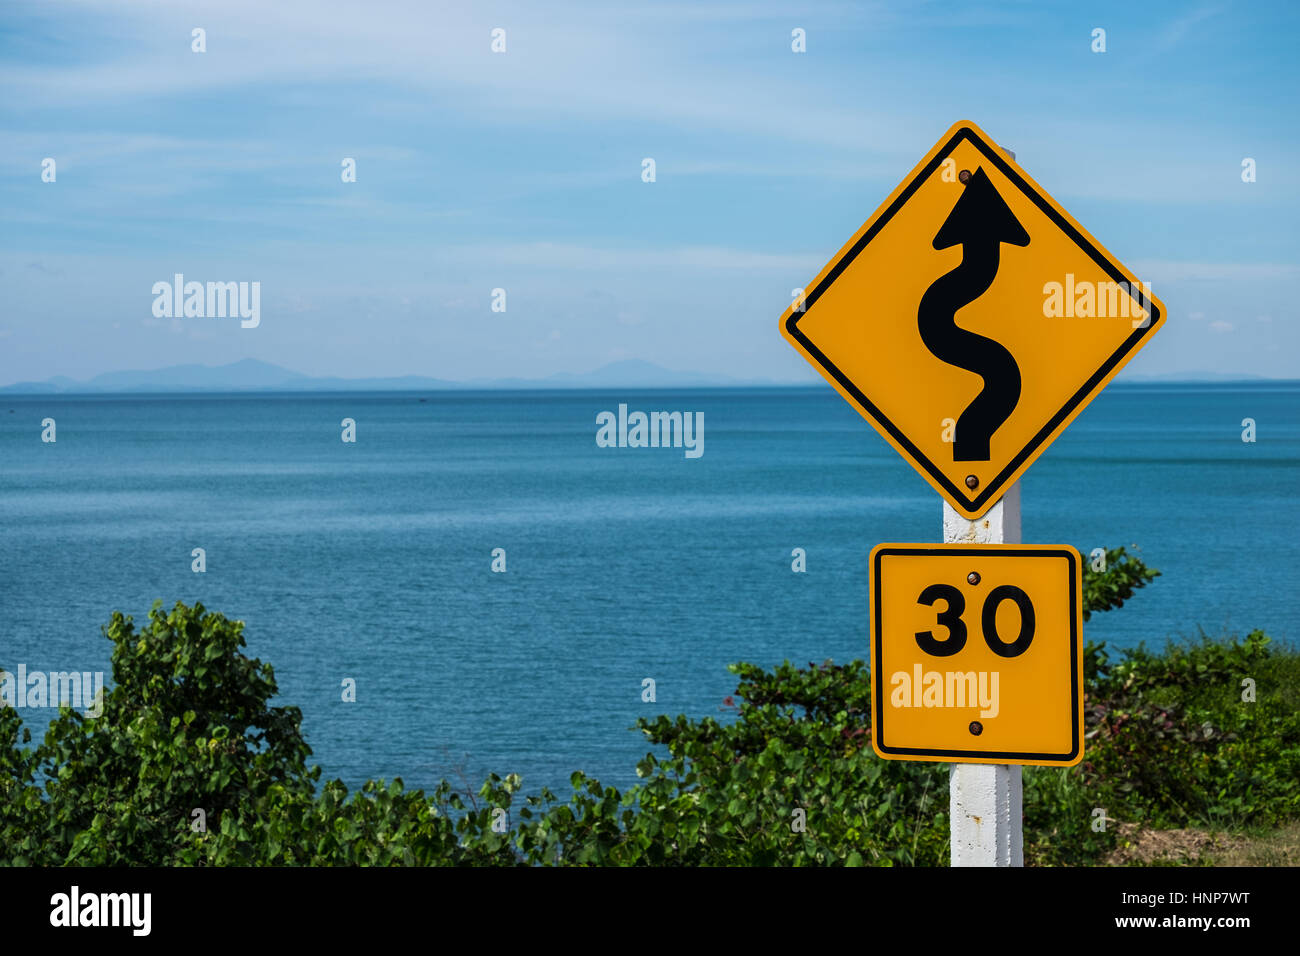 Traffic sign indicating a winding road must be using a speed of 30 kilometers per hour. Stock Photo